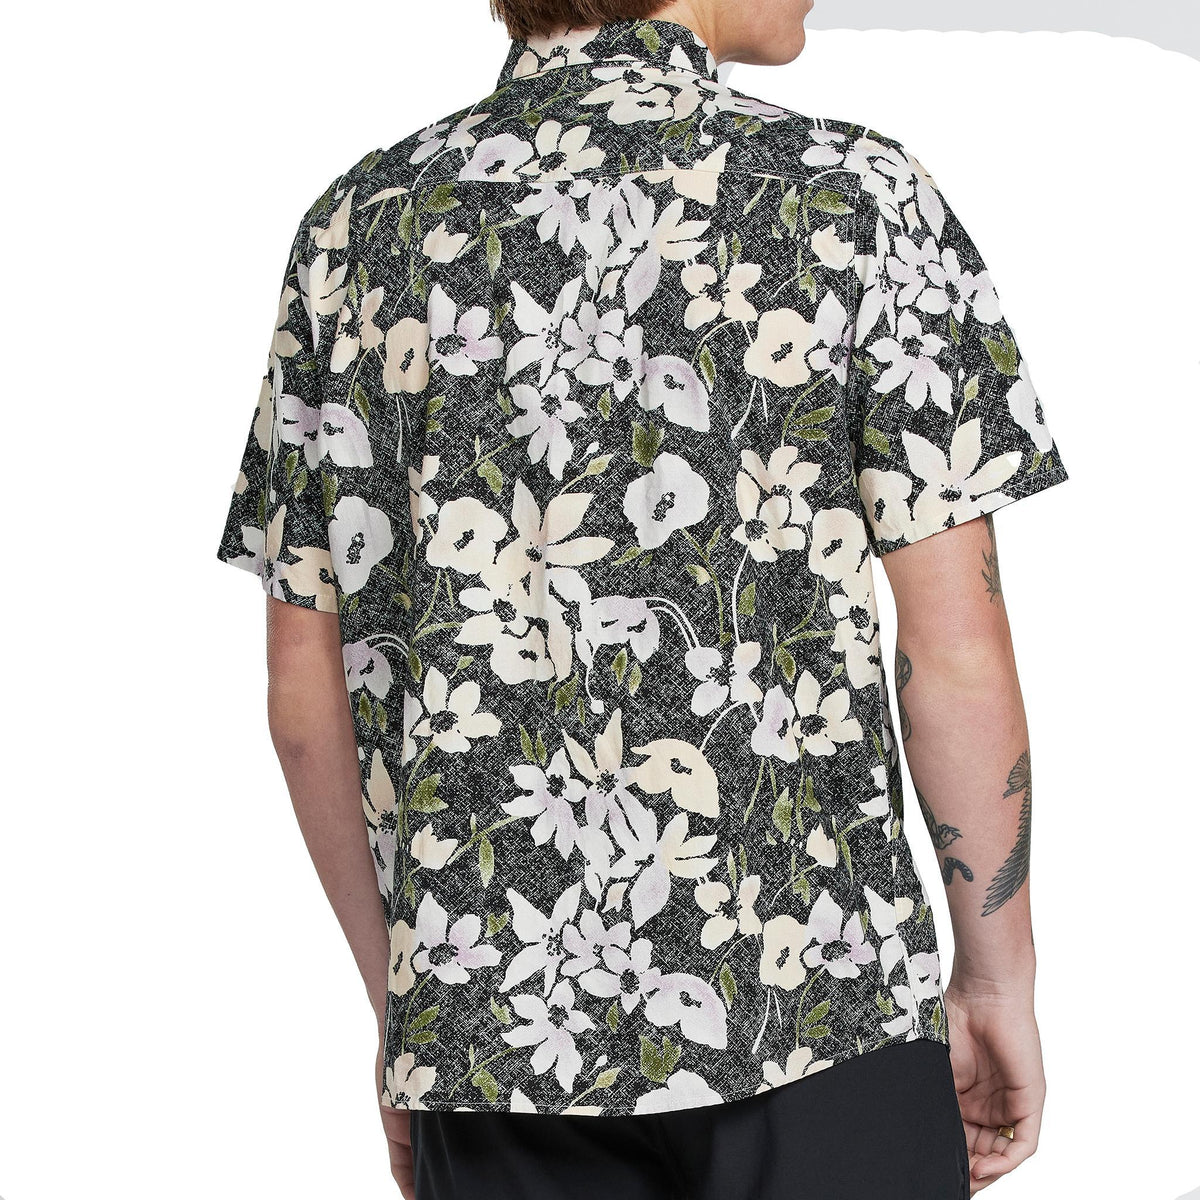 Back view of a men&#39;s short sleeve floral button-down shirt. The vibrant floral pattern continues from the front to the back against a light background. The shirt is neatly tailored and features a classic collar. This stylish garment is suitable for casual occasions during warm weather.